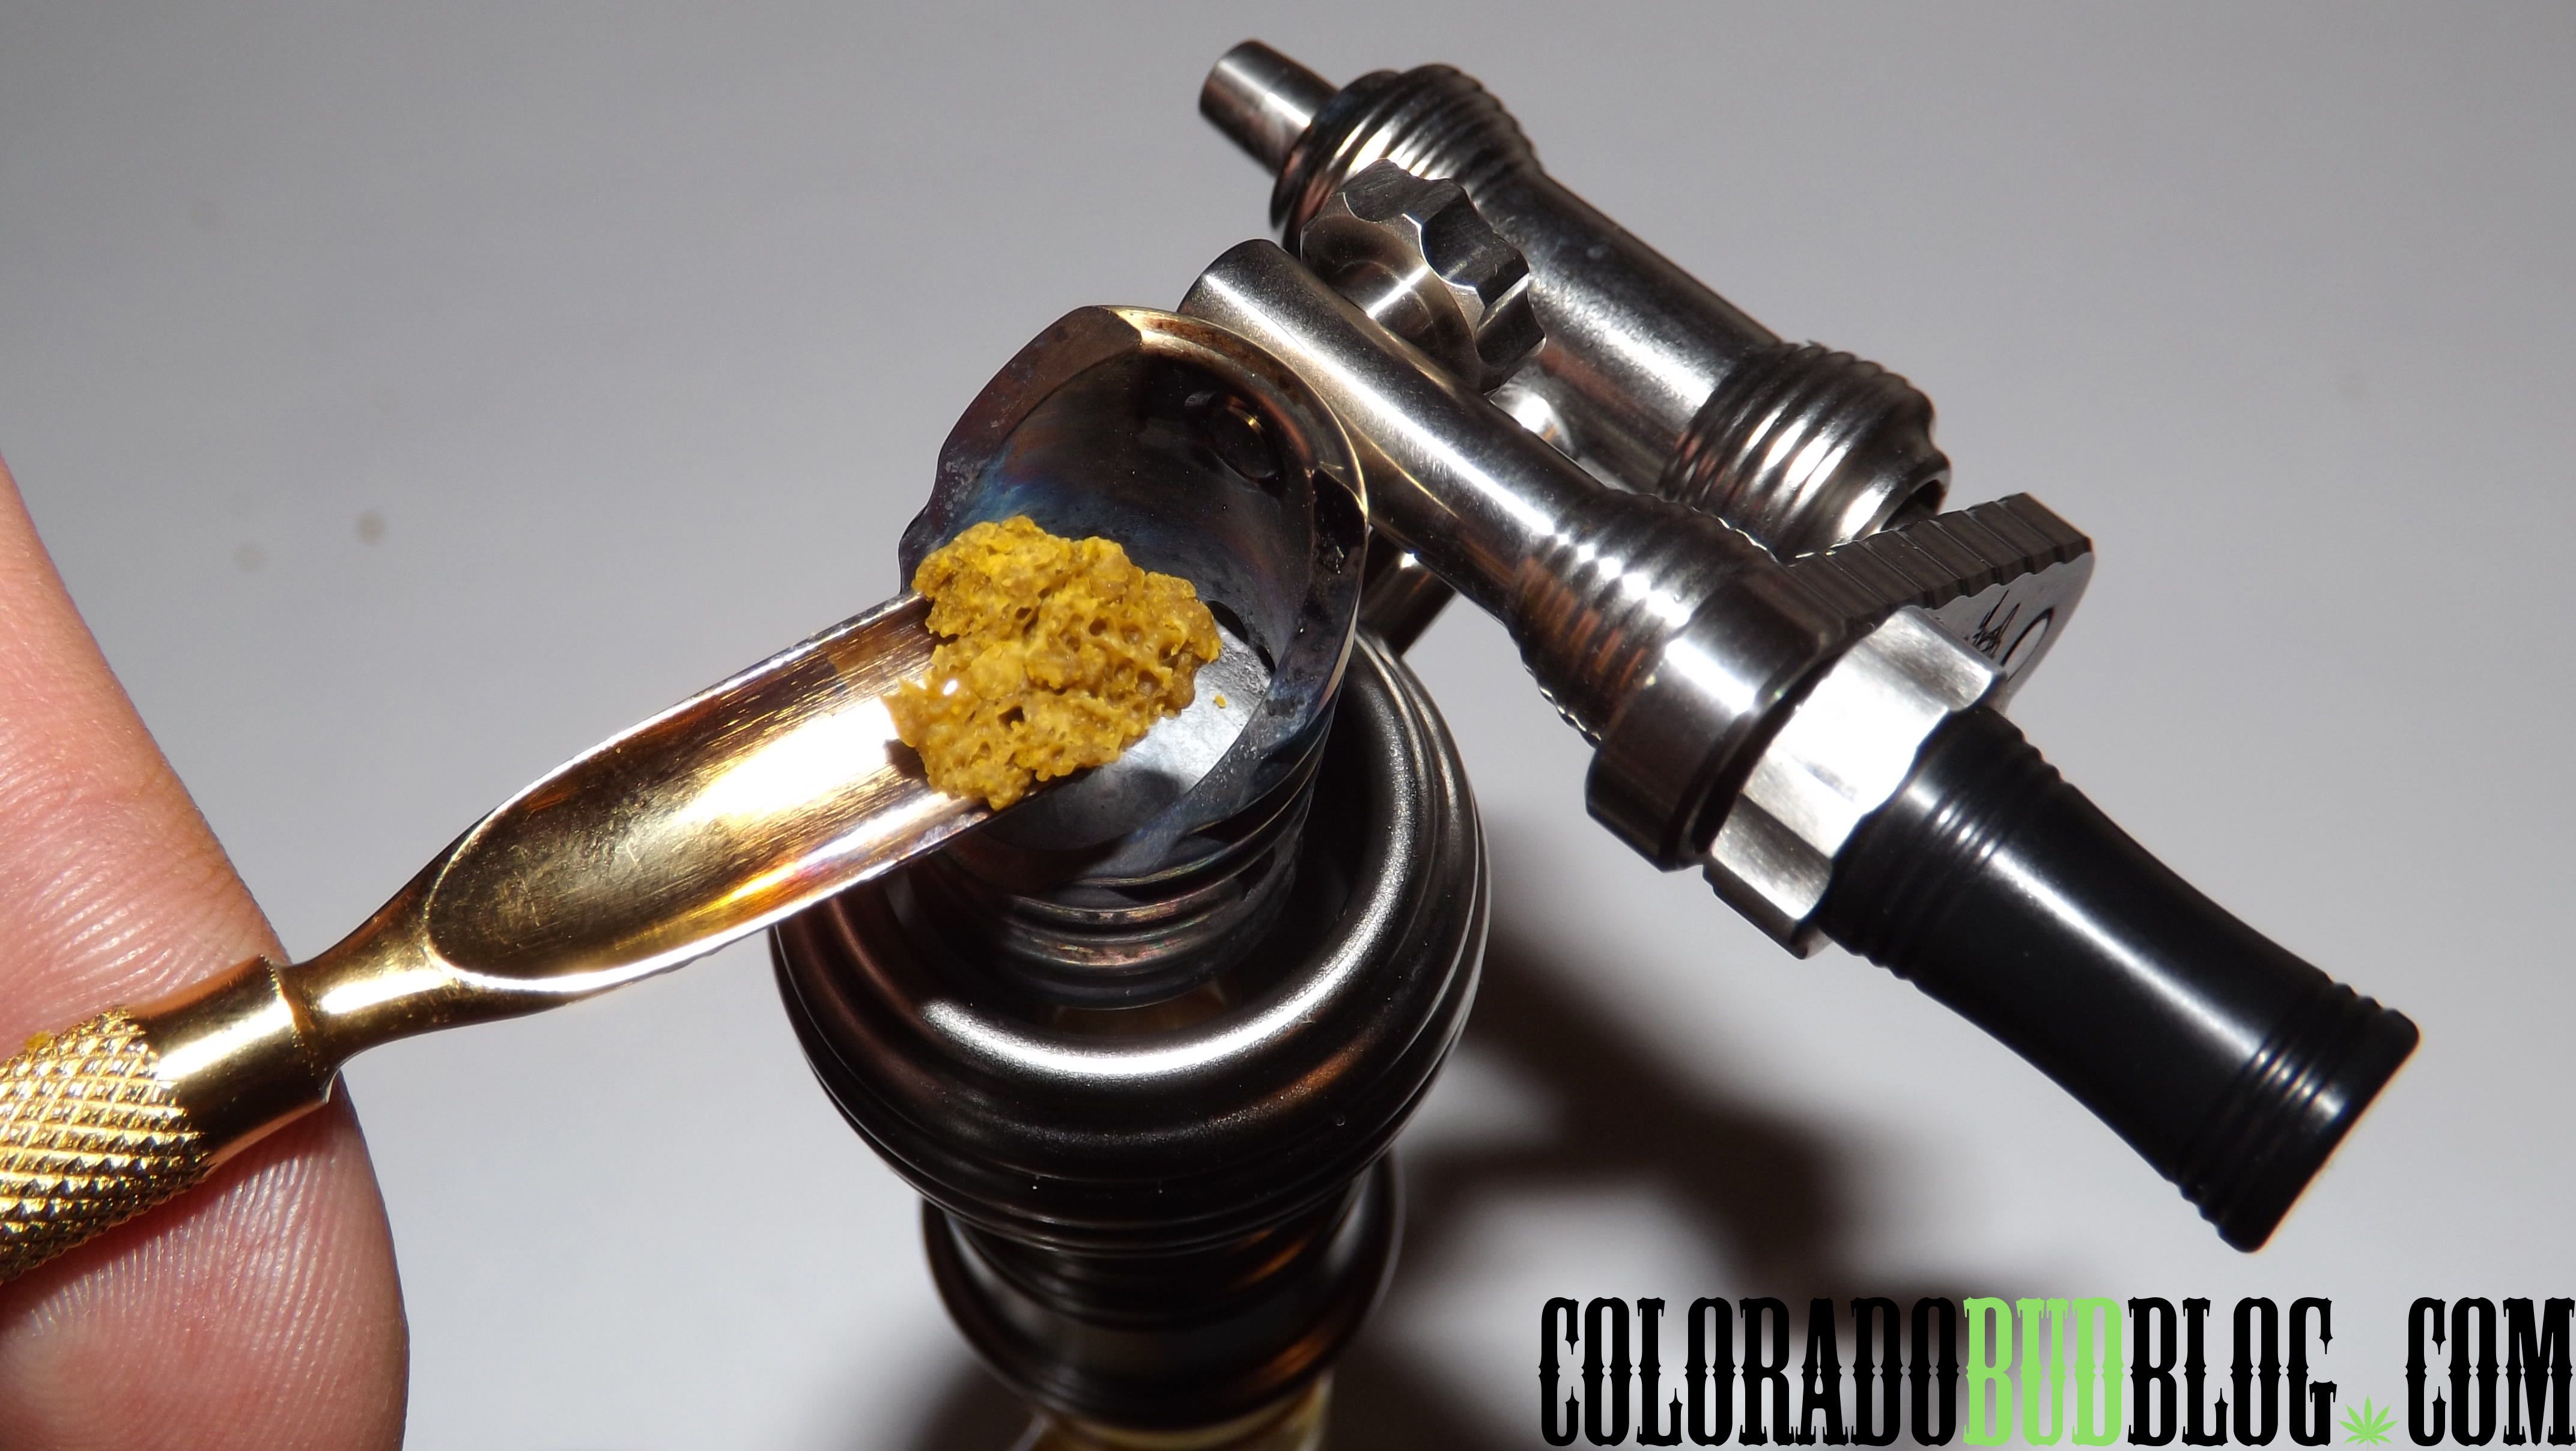 Product Review: “18mm Honey Bucket” from “Cosmic Direct 